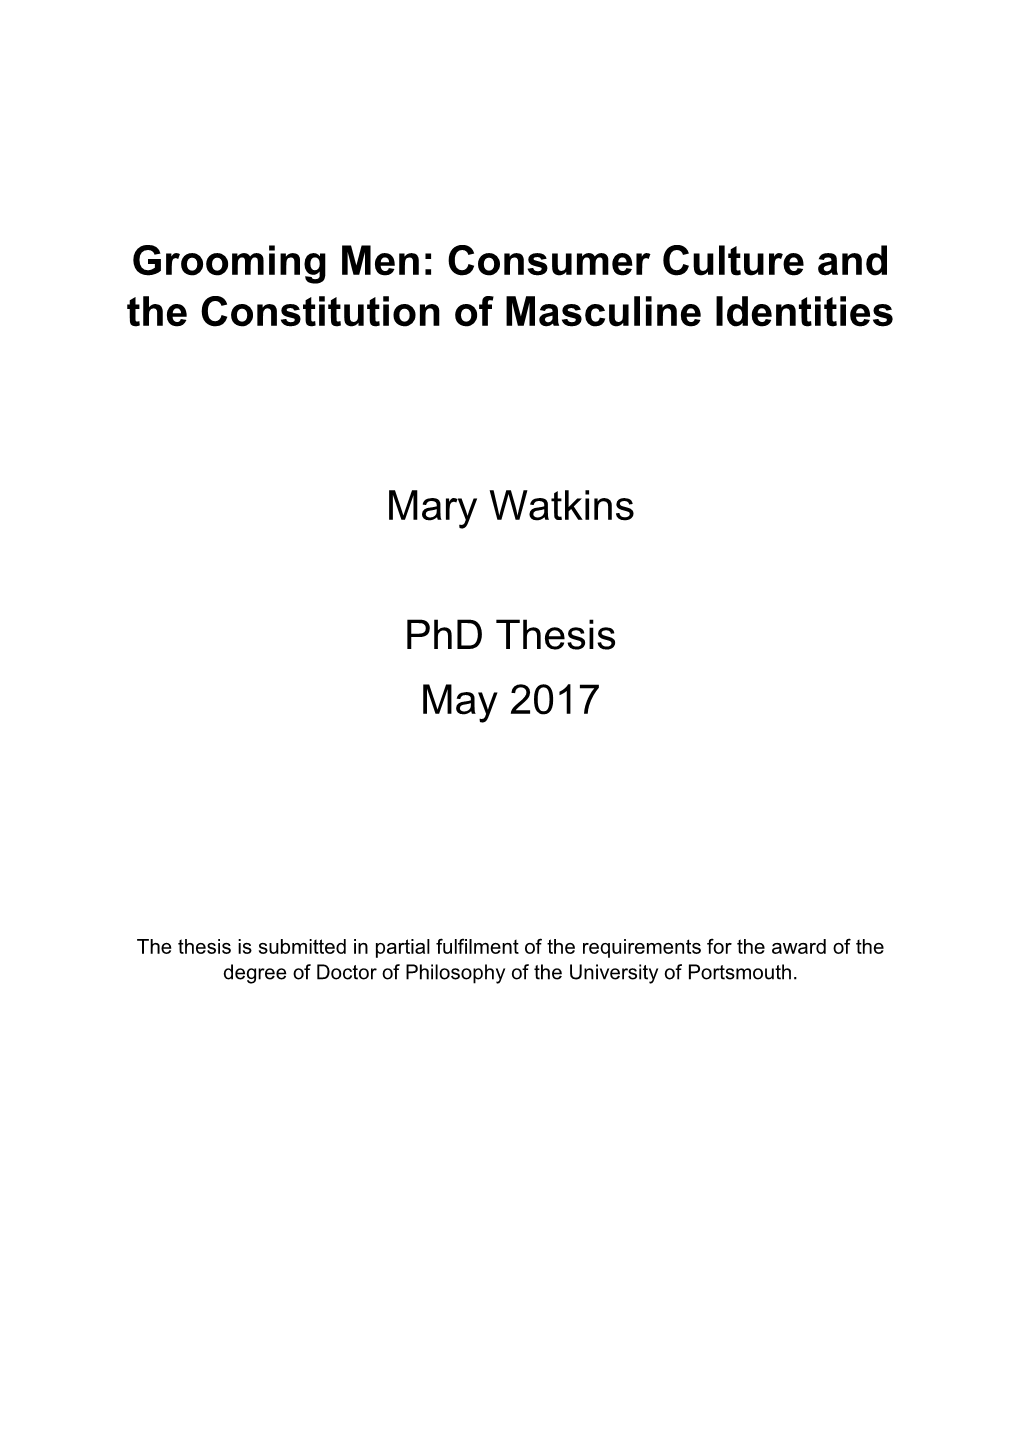 Grooming Men: Consumer Culture and the Constitution of Masculine Identities